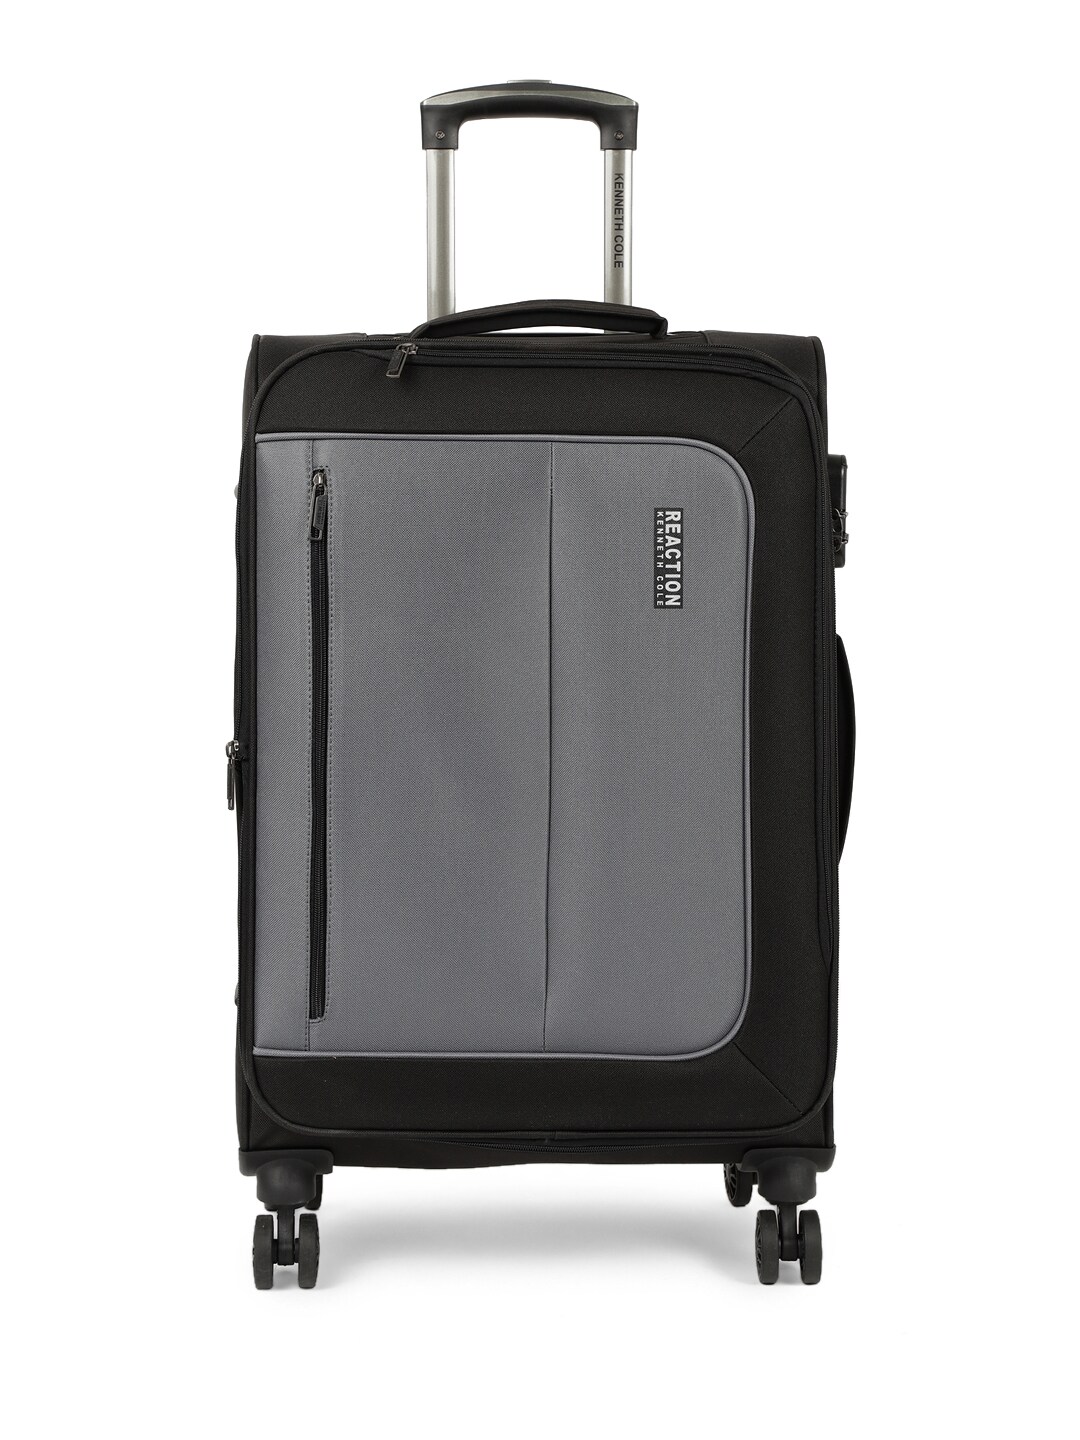 Kenneth Cole Unisex Black & Grey Colourblocked Reaction 24" Medium Trolley Suitcase Price in India